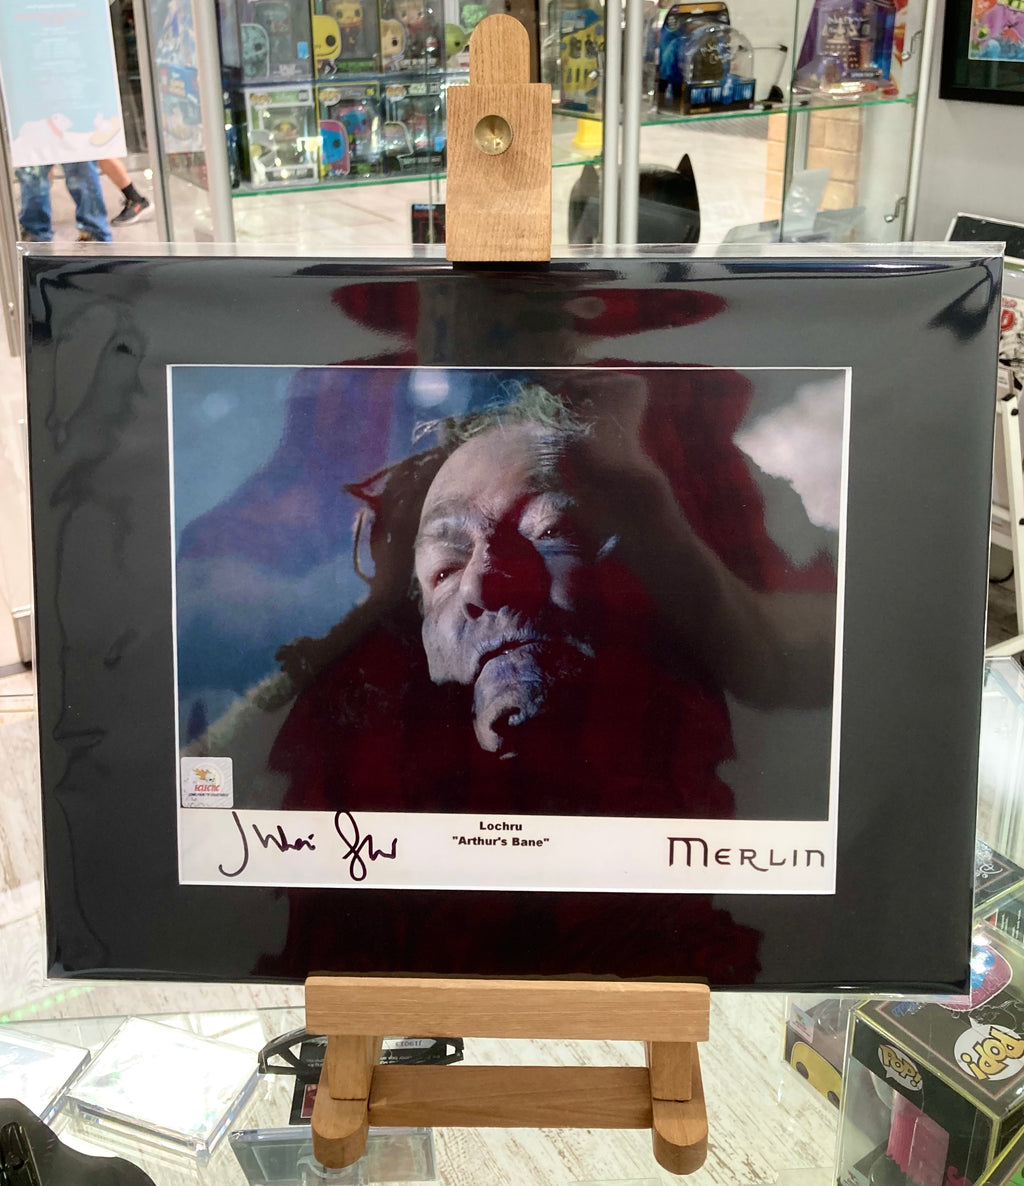 Merlin Julian Glover Autographed Mounted Photograph with Double Layer Authenticity